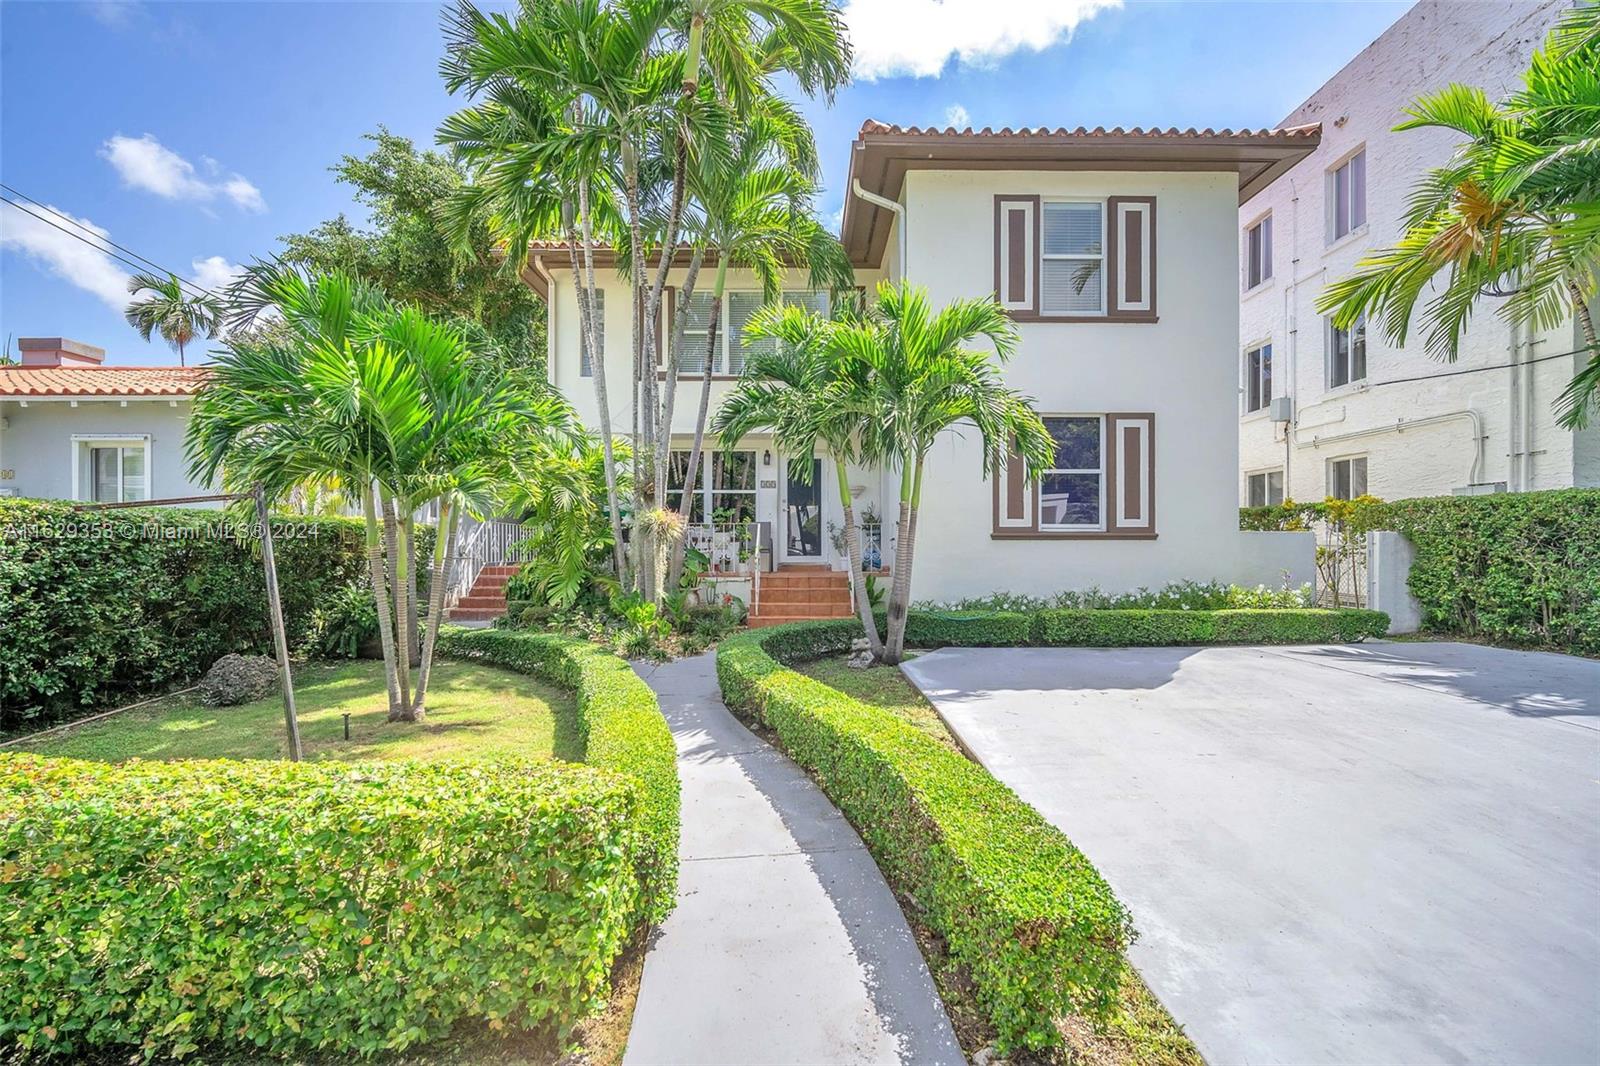 This completely remodeled 3-bedroom, 2-bathroom duplex is located on the second floor and features a private entrance. Situated in the highly sought-after neighborhood of The Roads, this property is just minutes away from Brickell, Key Biscayne, Downtown Miami, and Coral Gables. Enjoy the convenience of two dedicated parking spaces plus ample street parking. This is a must-see property!